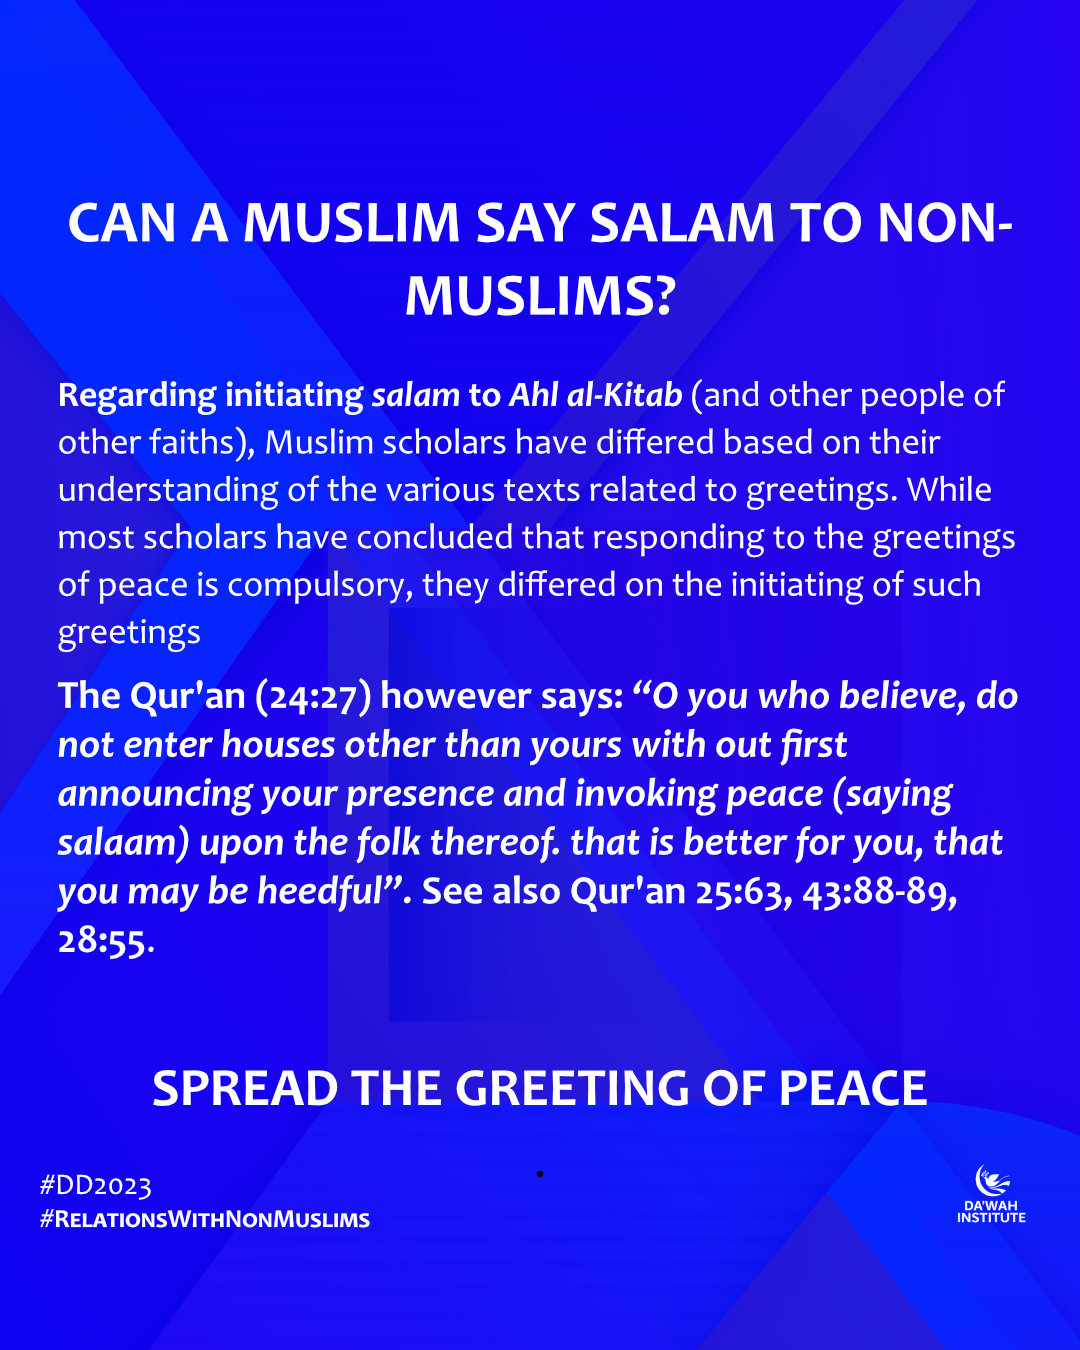 CAN A MUSLIM SAY SALAM TO NON-MUSLIMS?